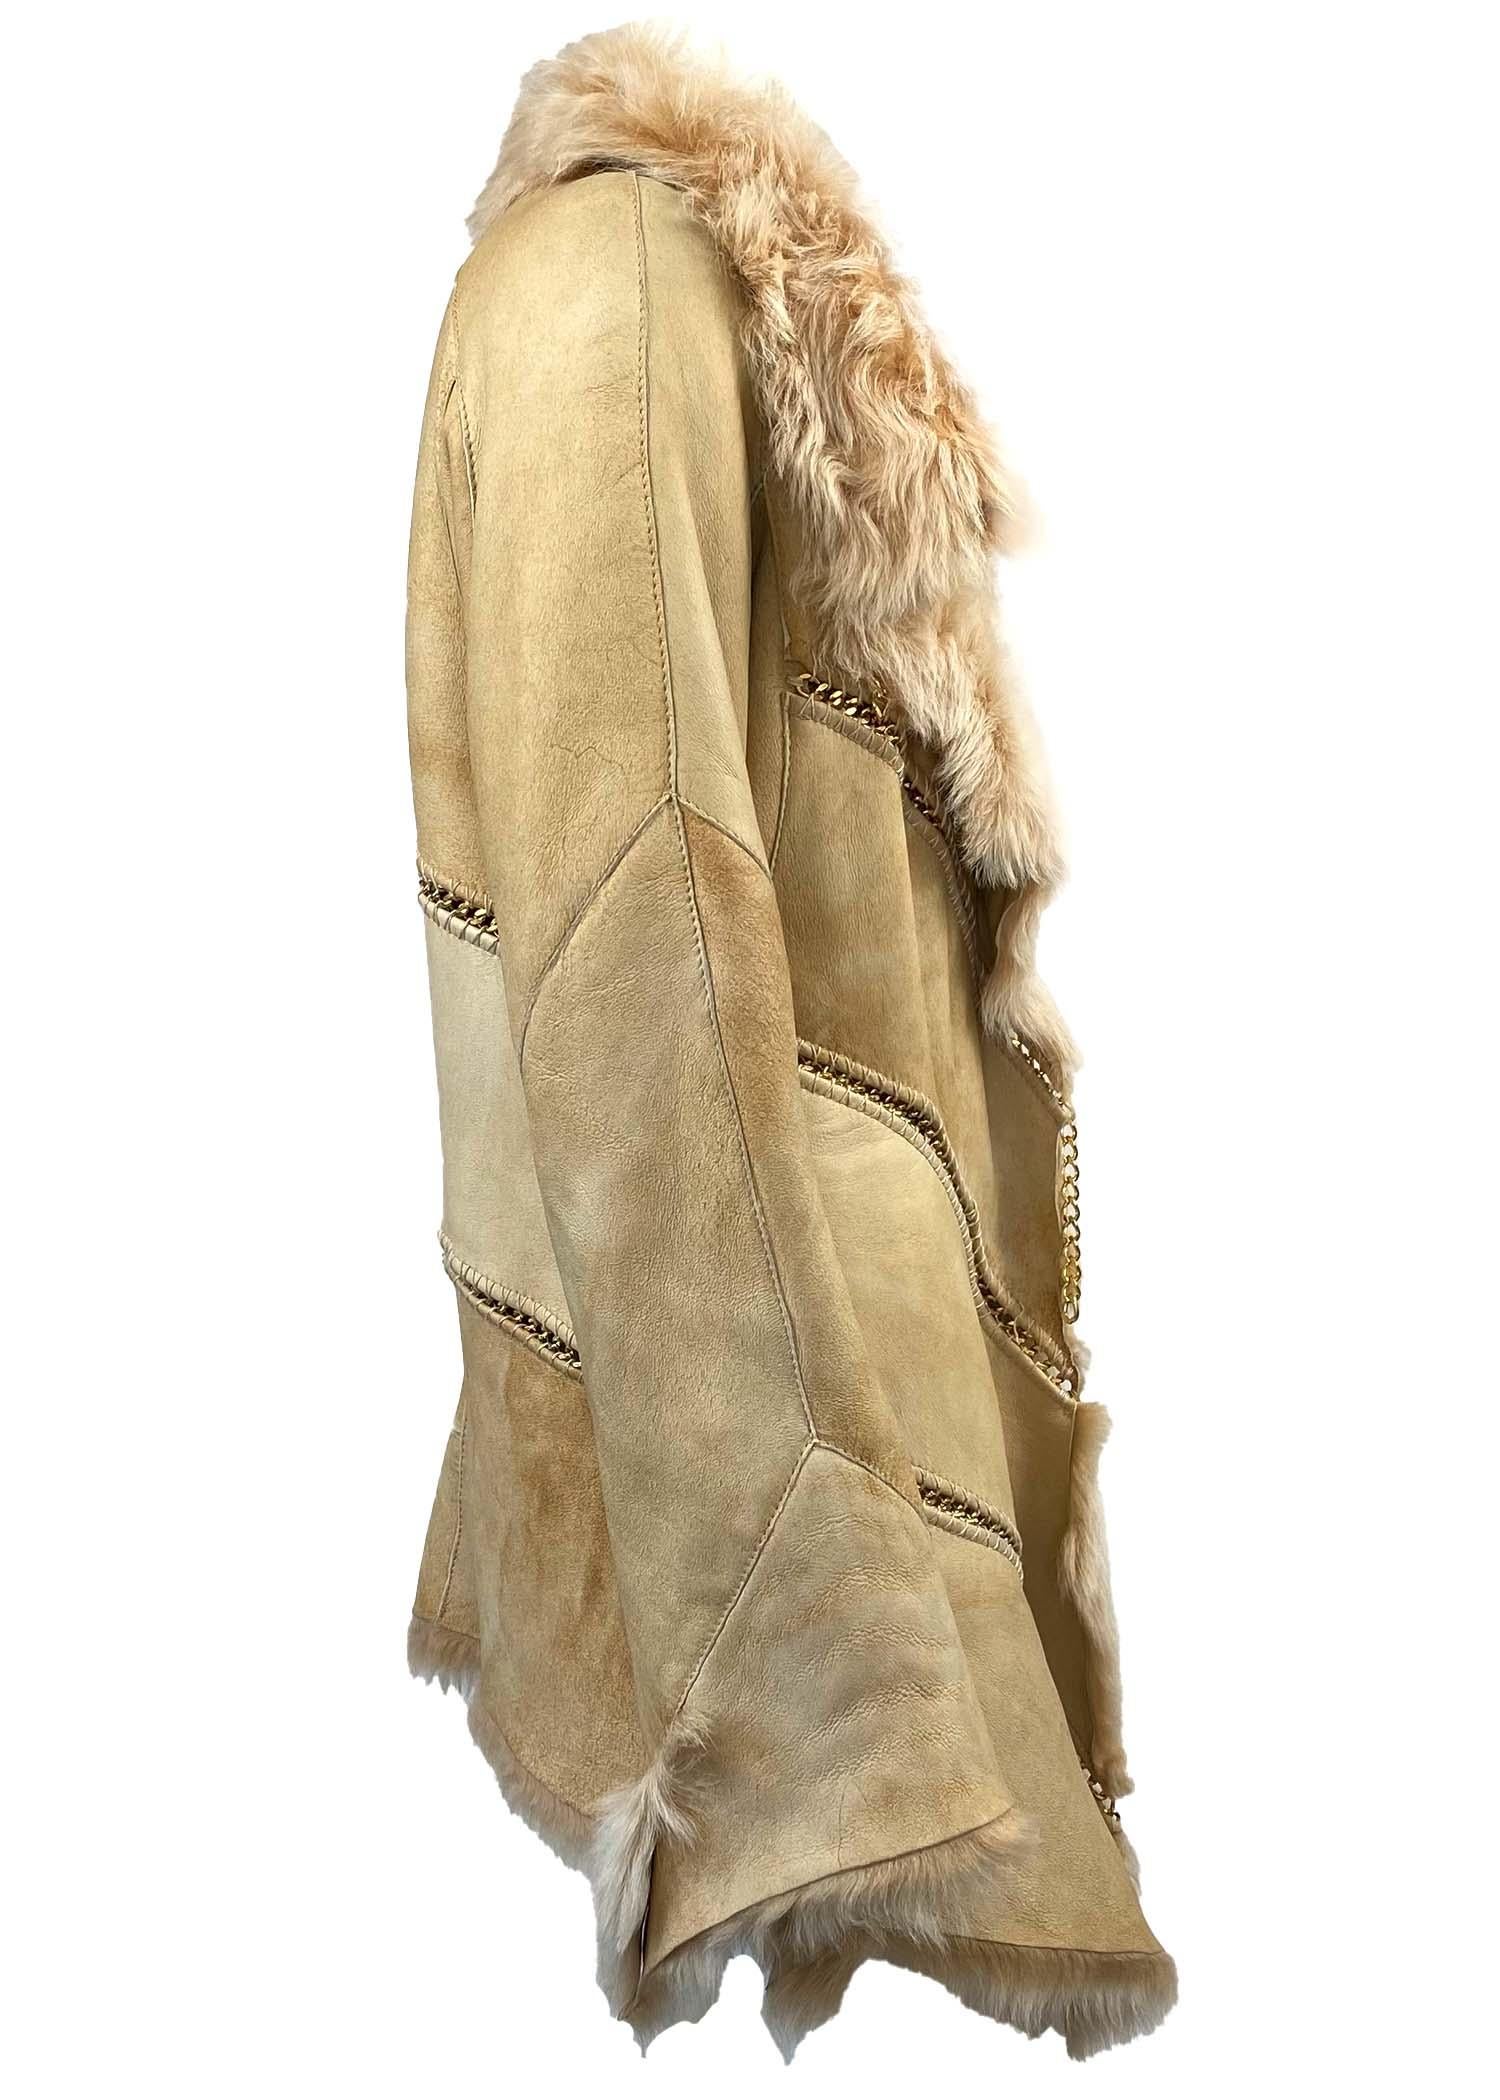 F/W 2003 Roberto Cavalli Shearling Chain Suede Oversized Coat In Good Condition For Sale In West Hollywood, CA